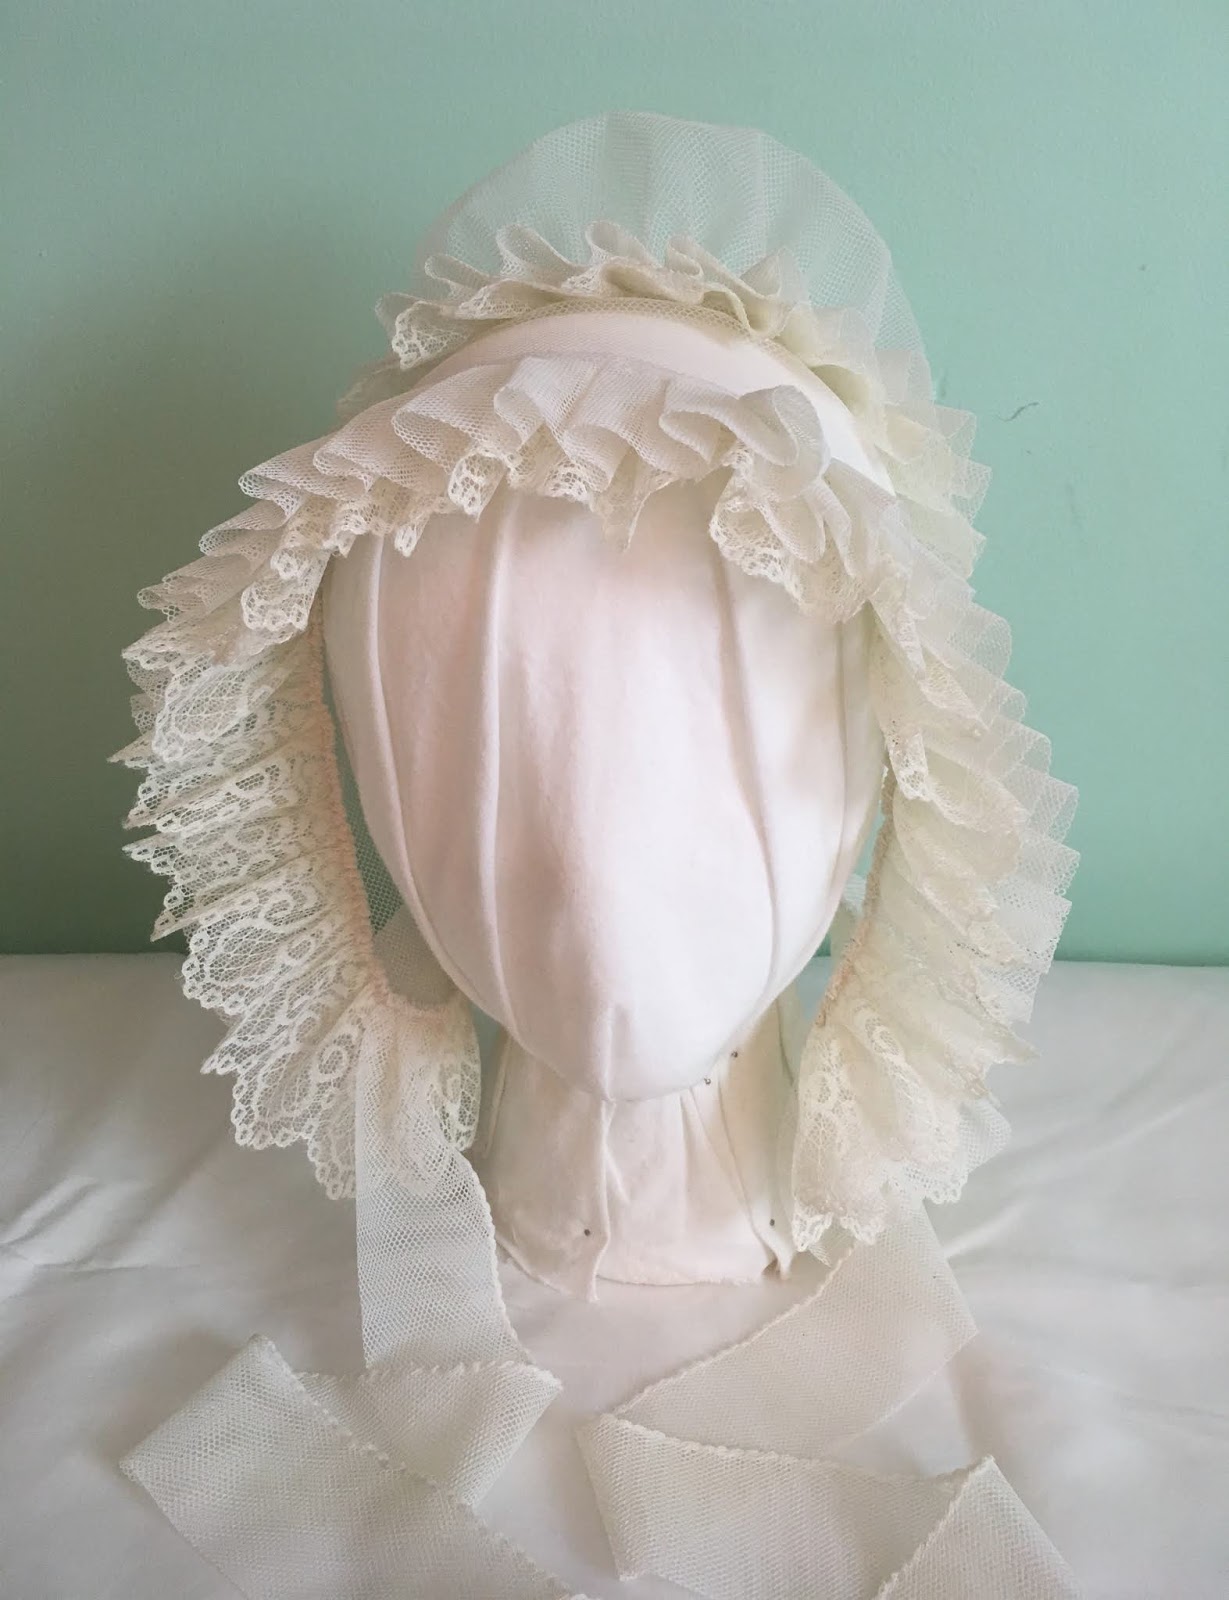 The Sewphisticate: 1830s Cap of Lace, Net & Ribbon